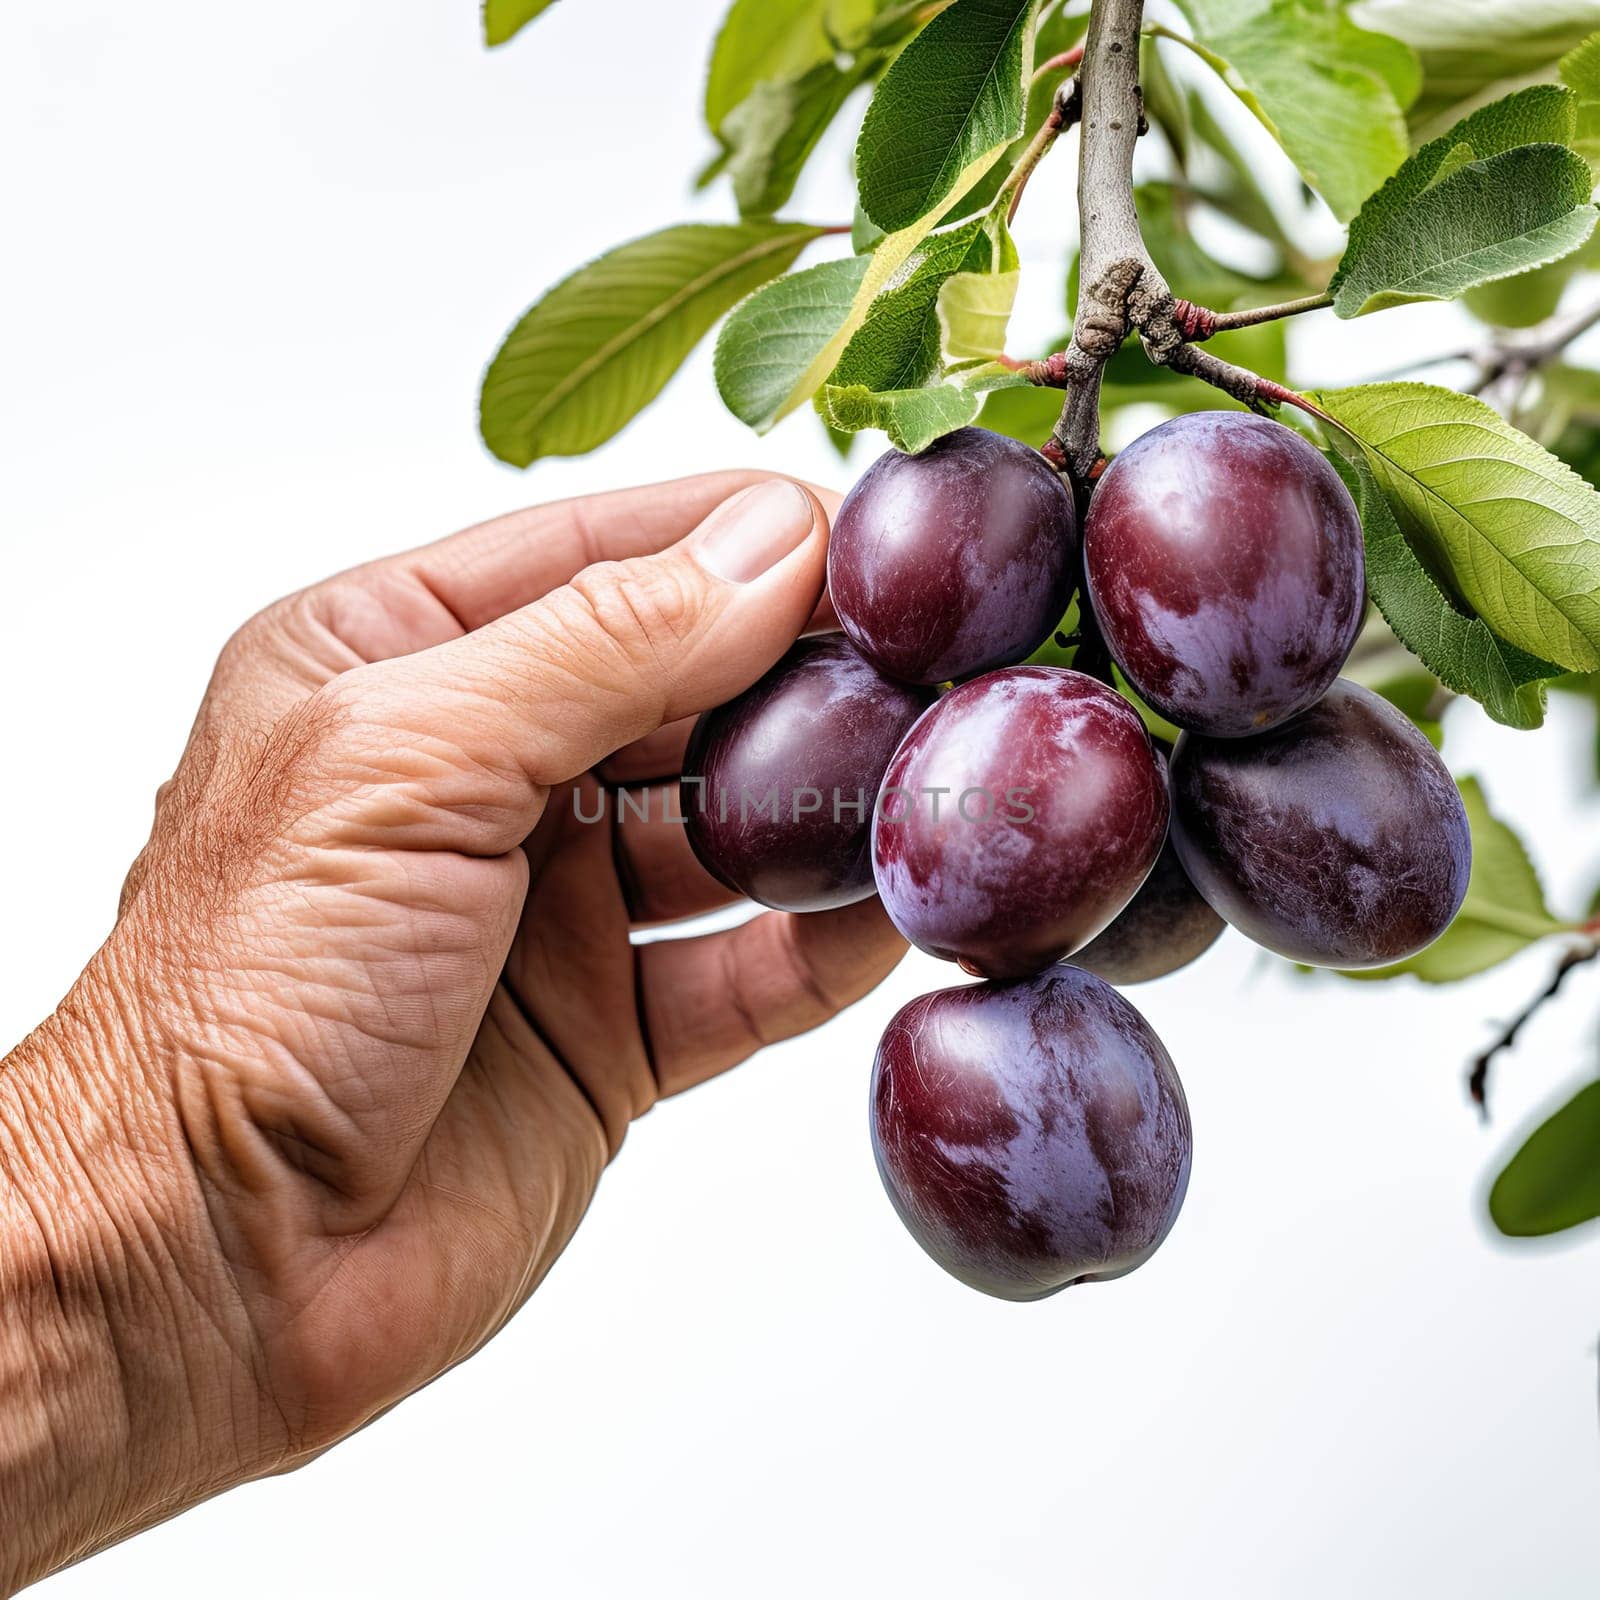 Hand picking up ripe red grapes from a tree isolated on white background. Studio shot.